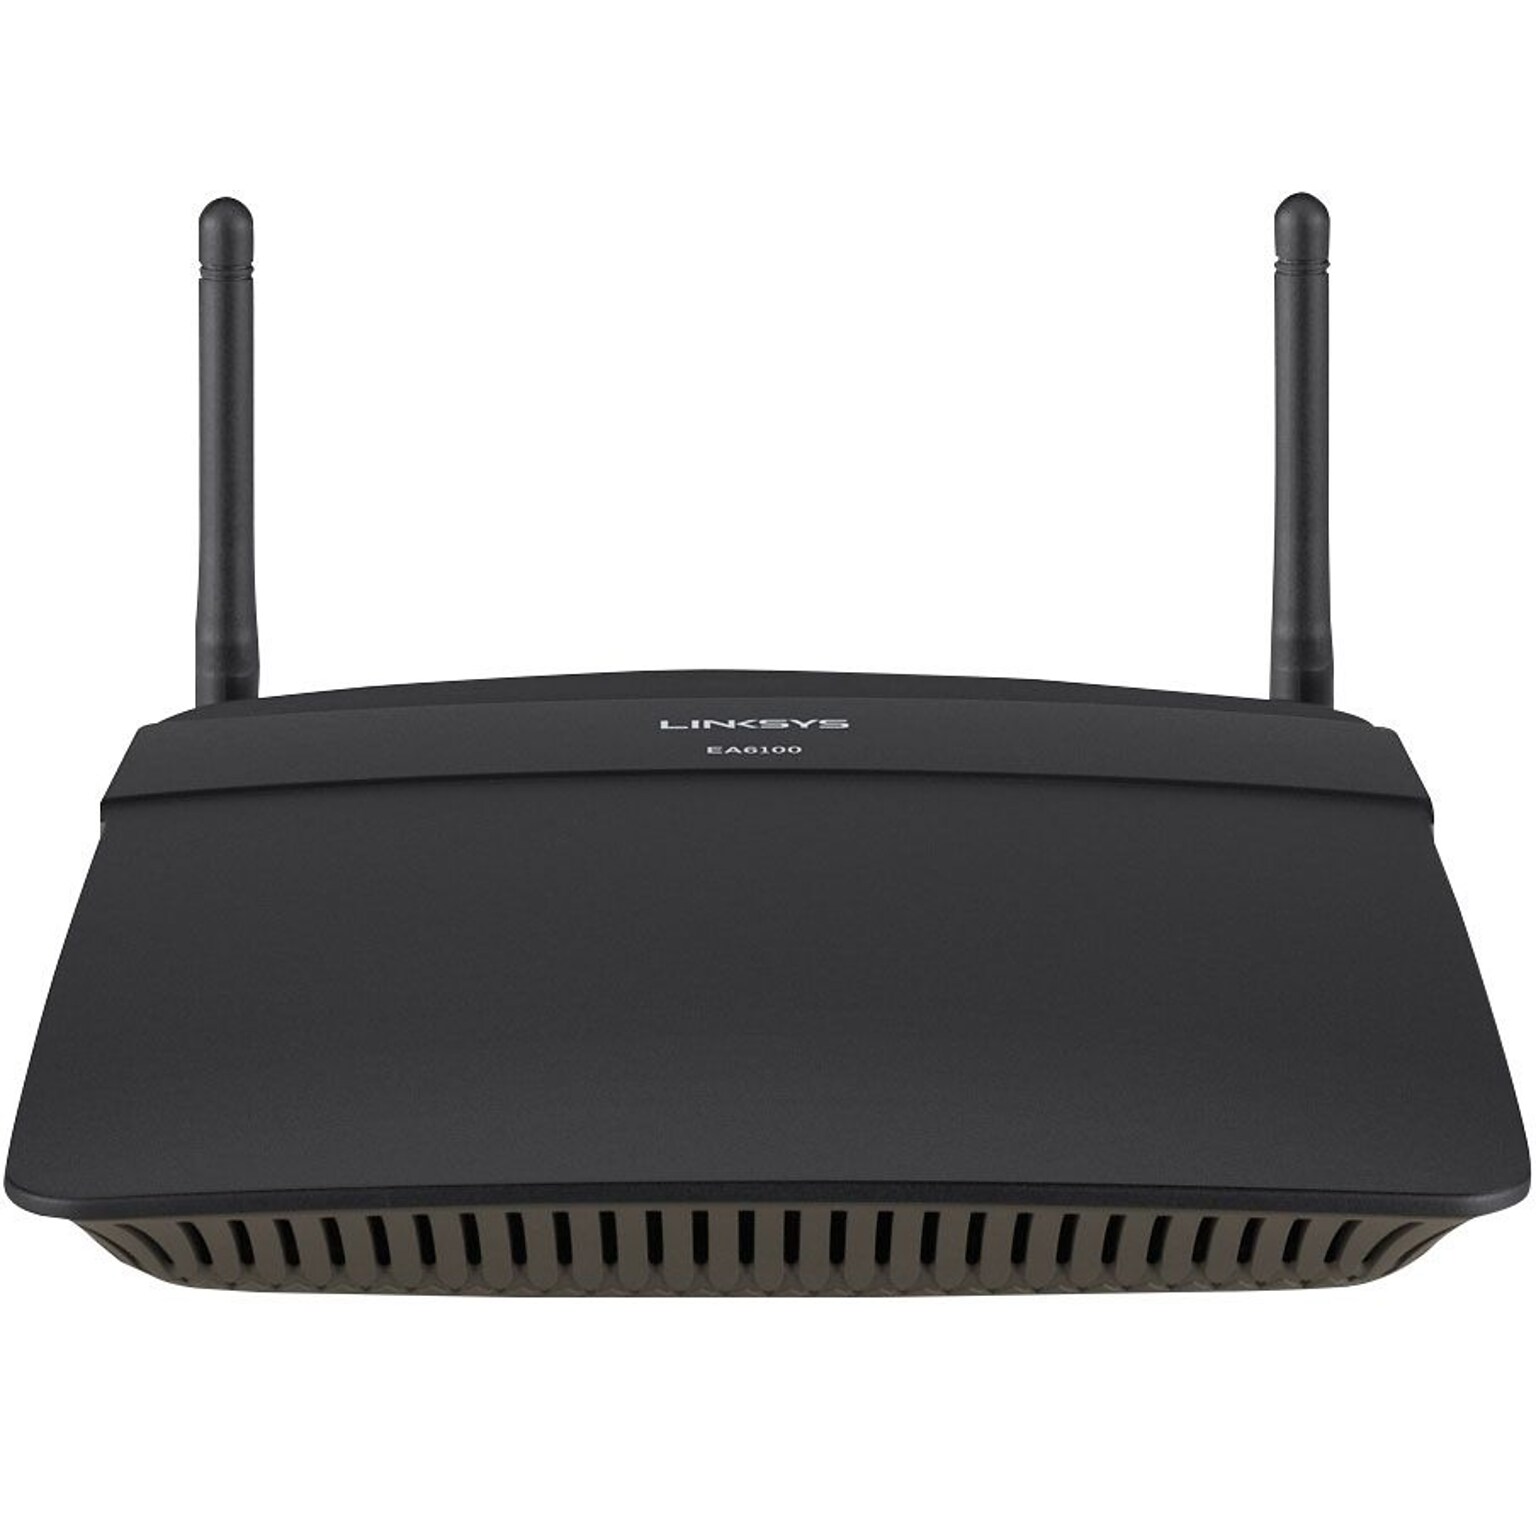 Linksys EA6100 AC1200 Dual-band Smart WiFi Router (Certified Refurbished)